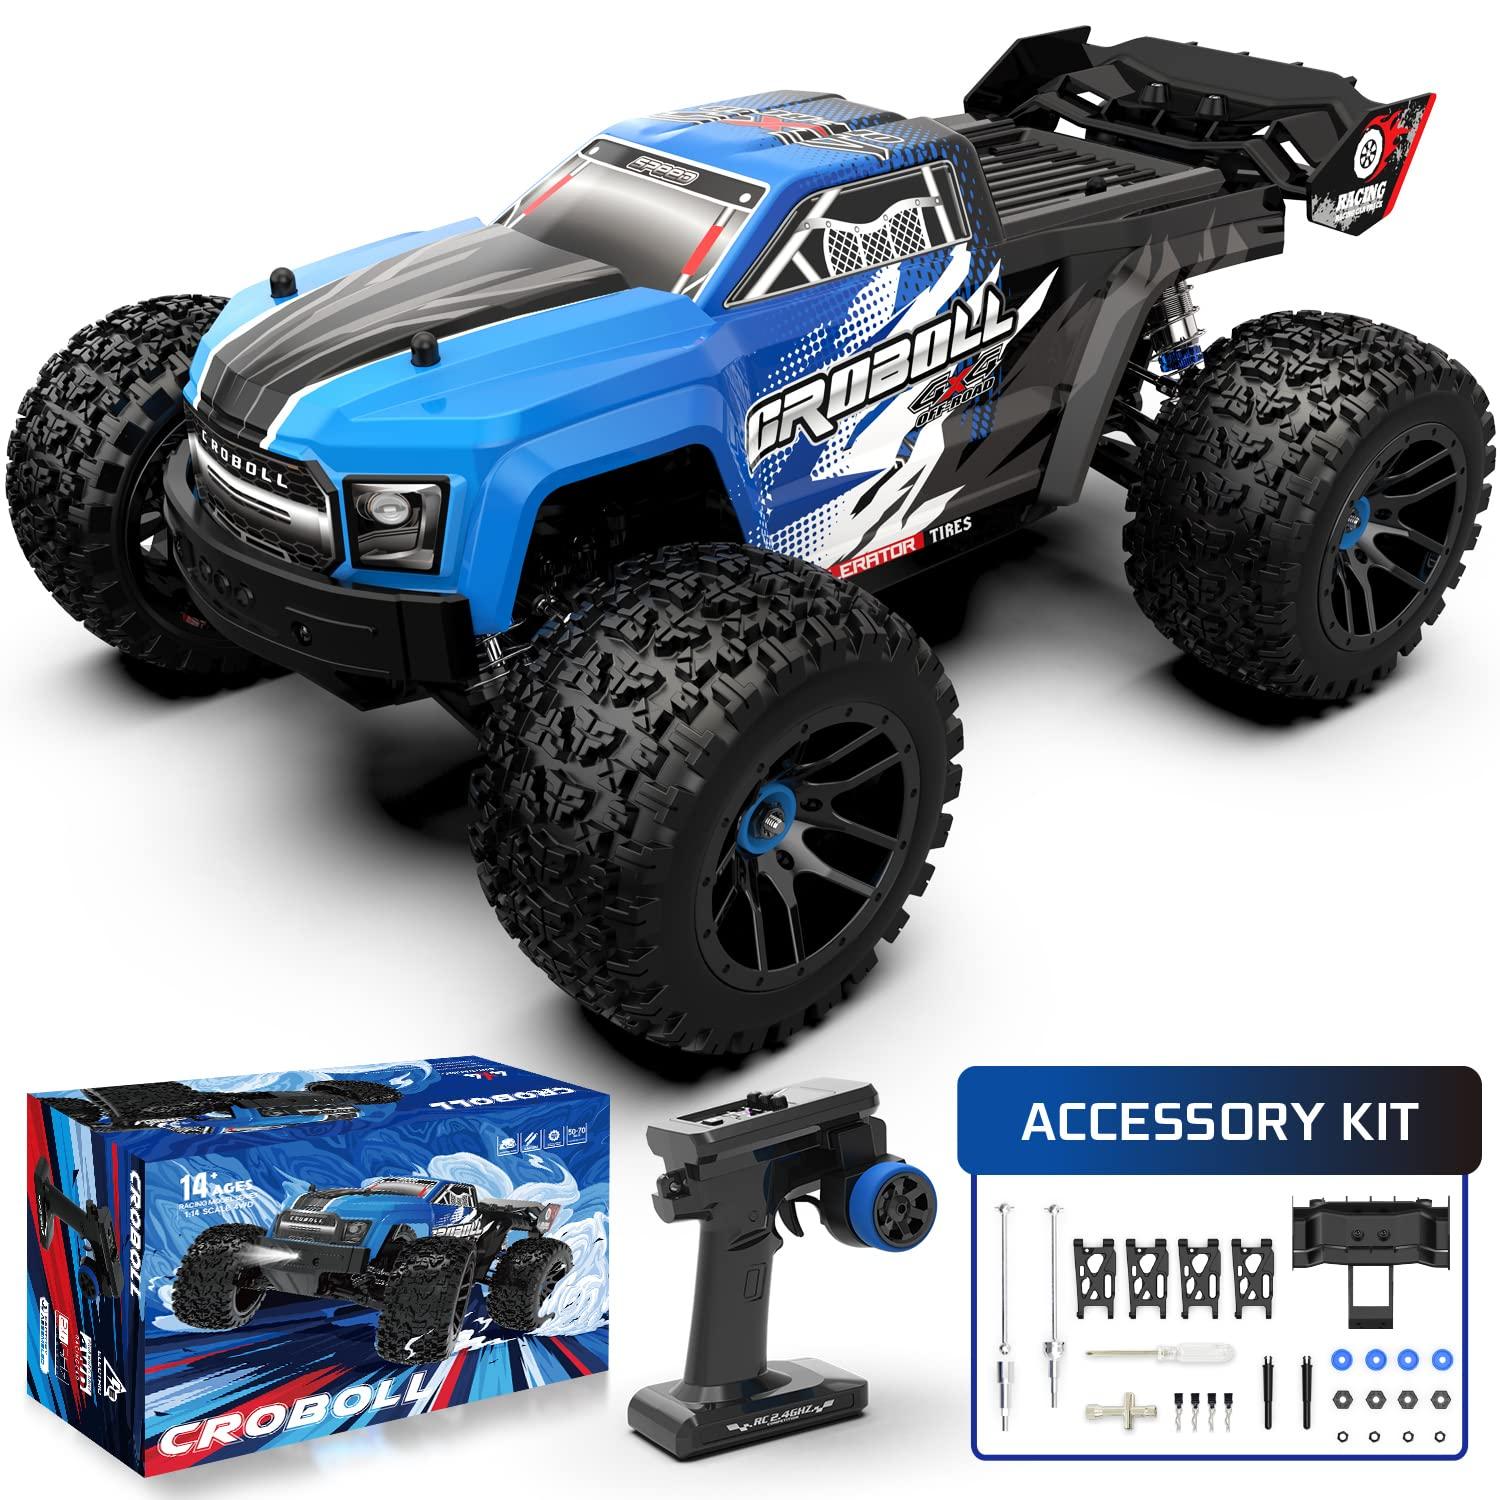 Truggy Rc Car: Top Truggy RC Car Brands and Models